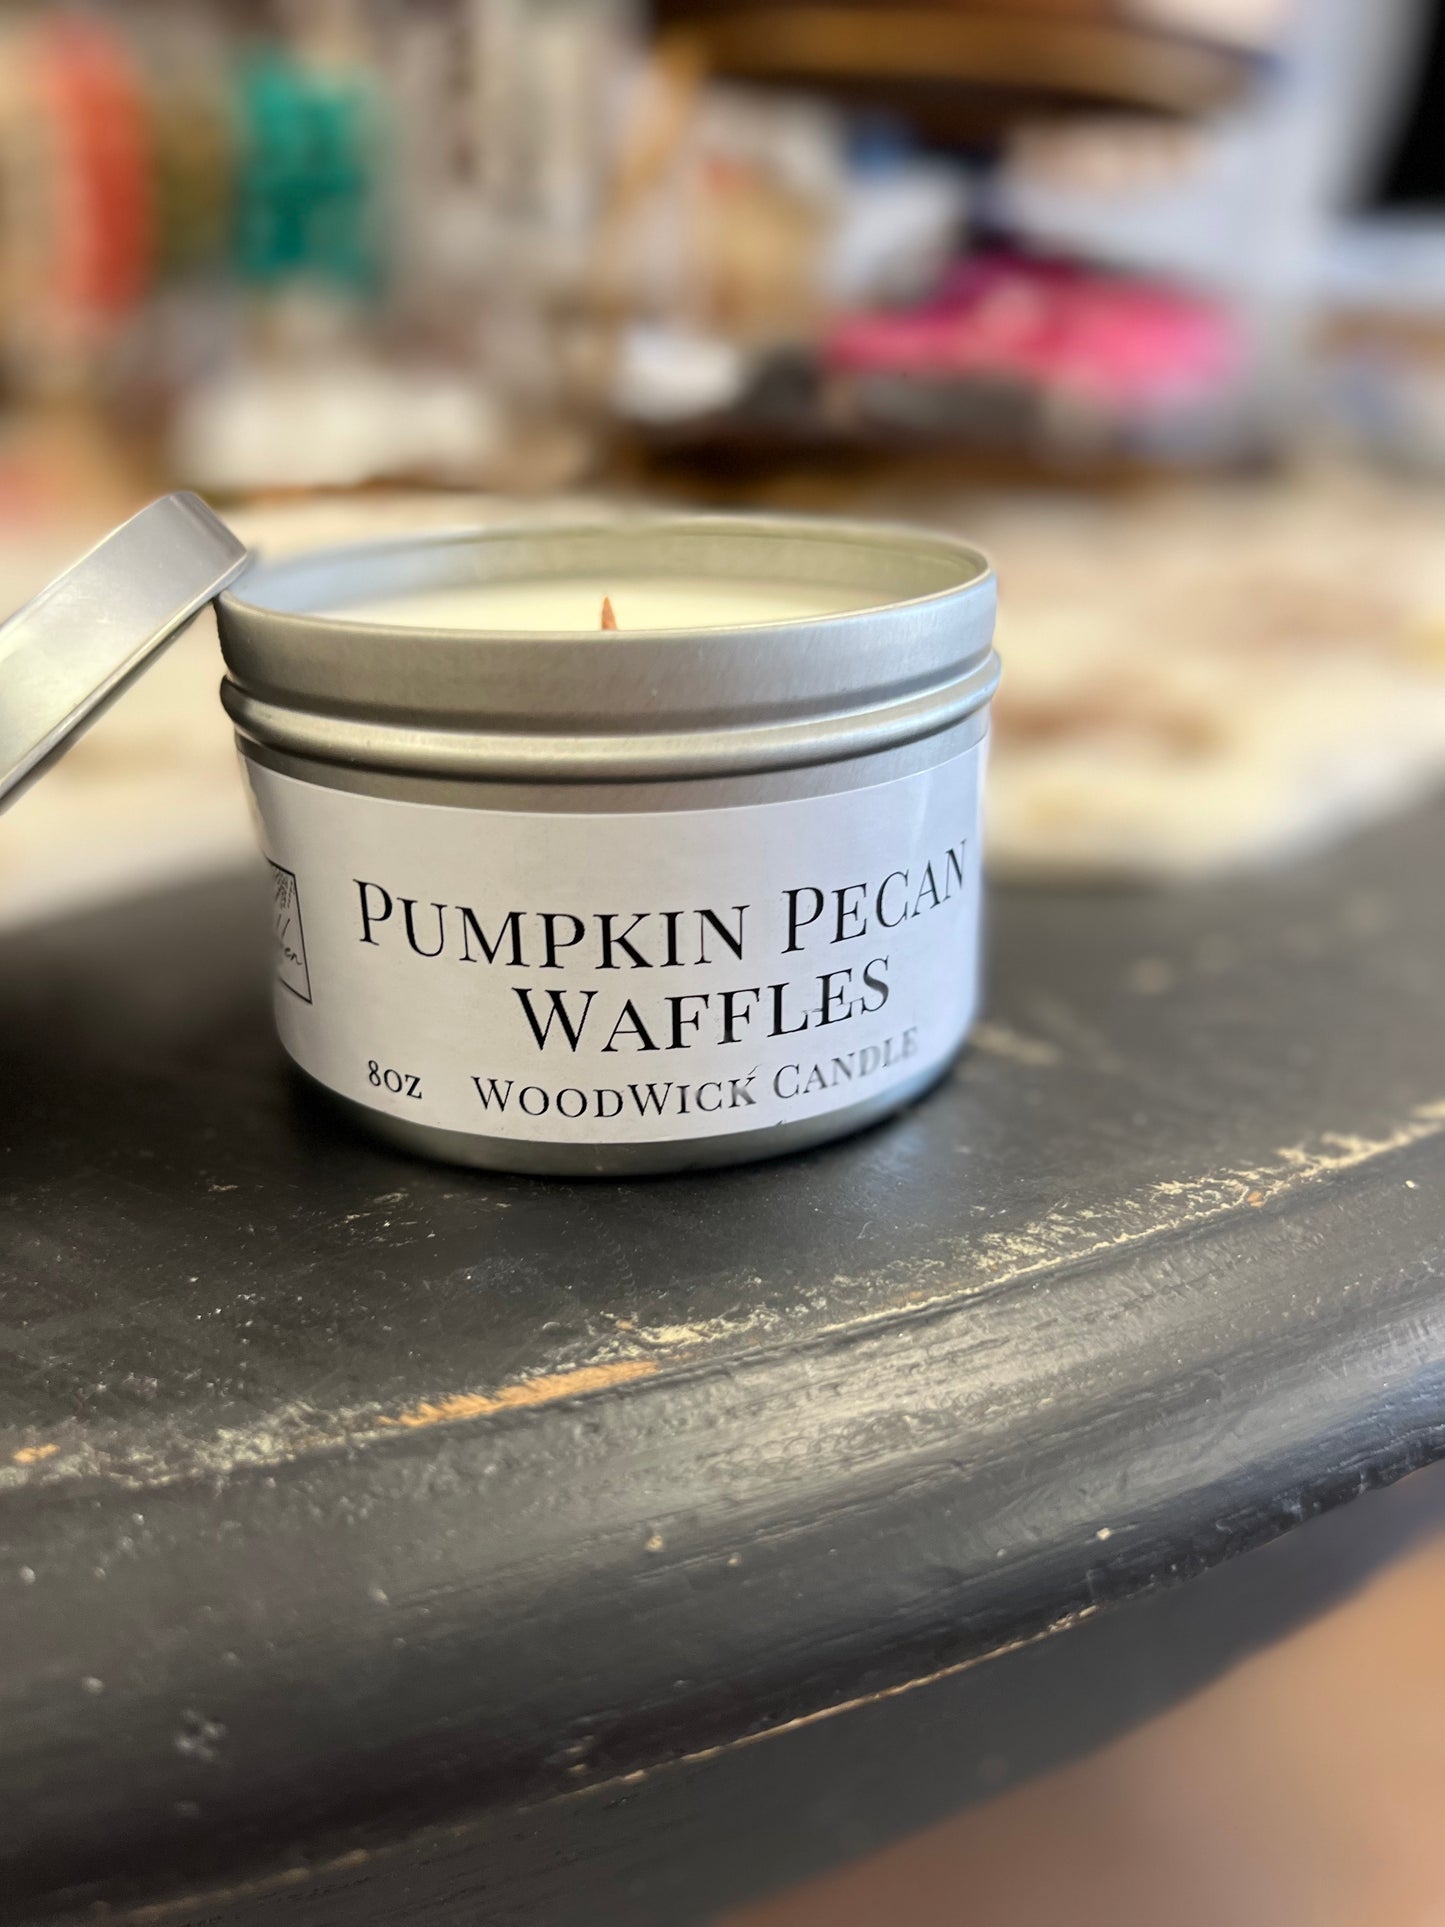 Pumpkin Pecan Waffles Candle with Wood Wick